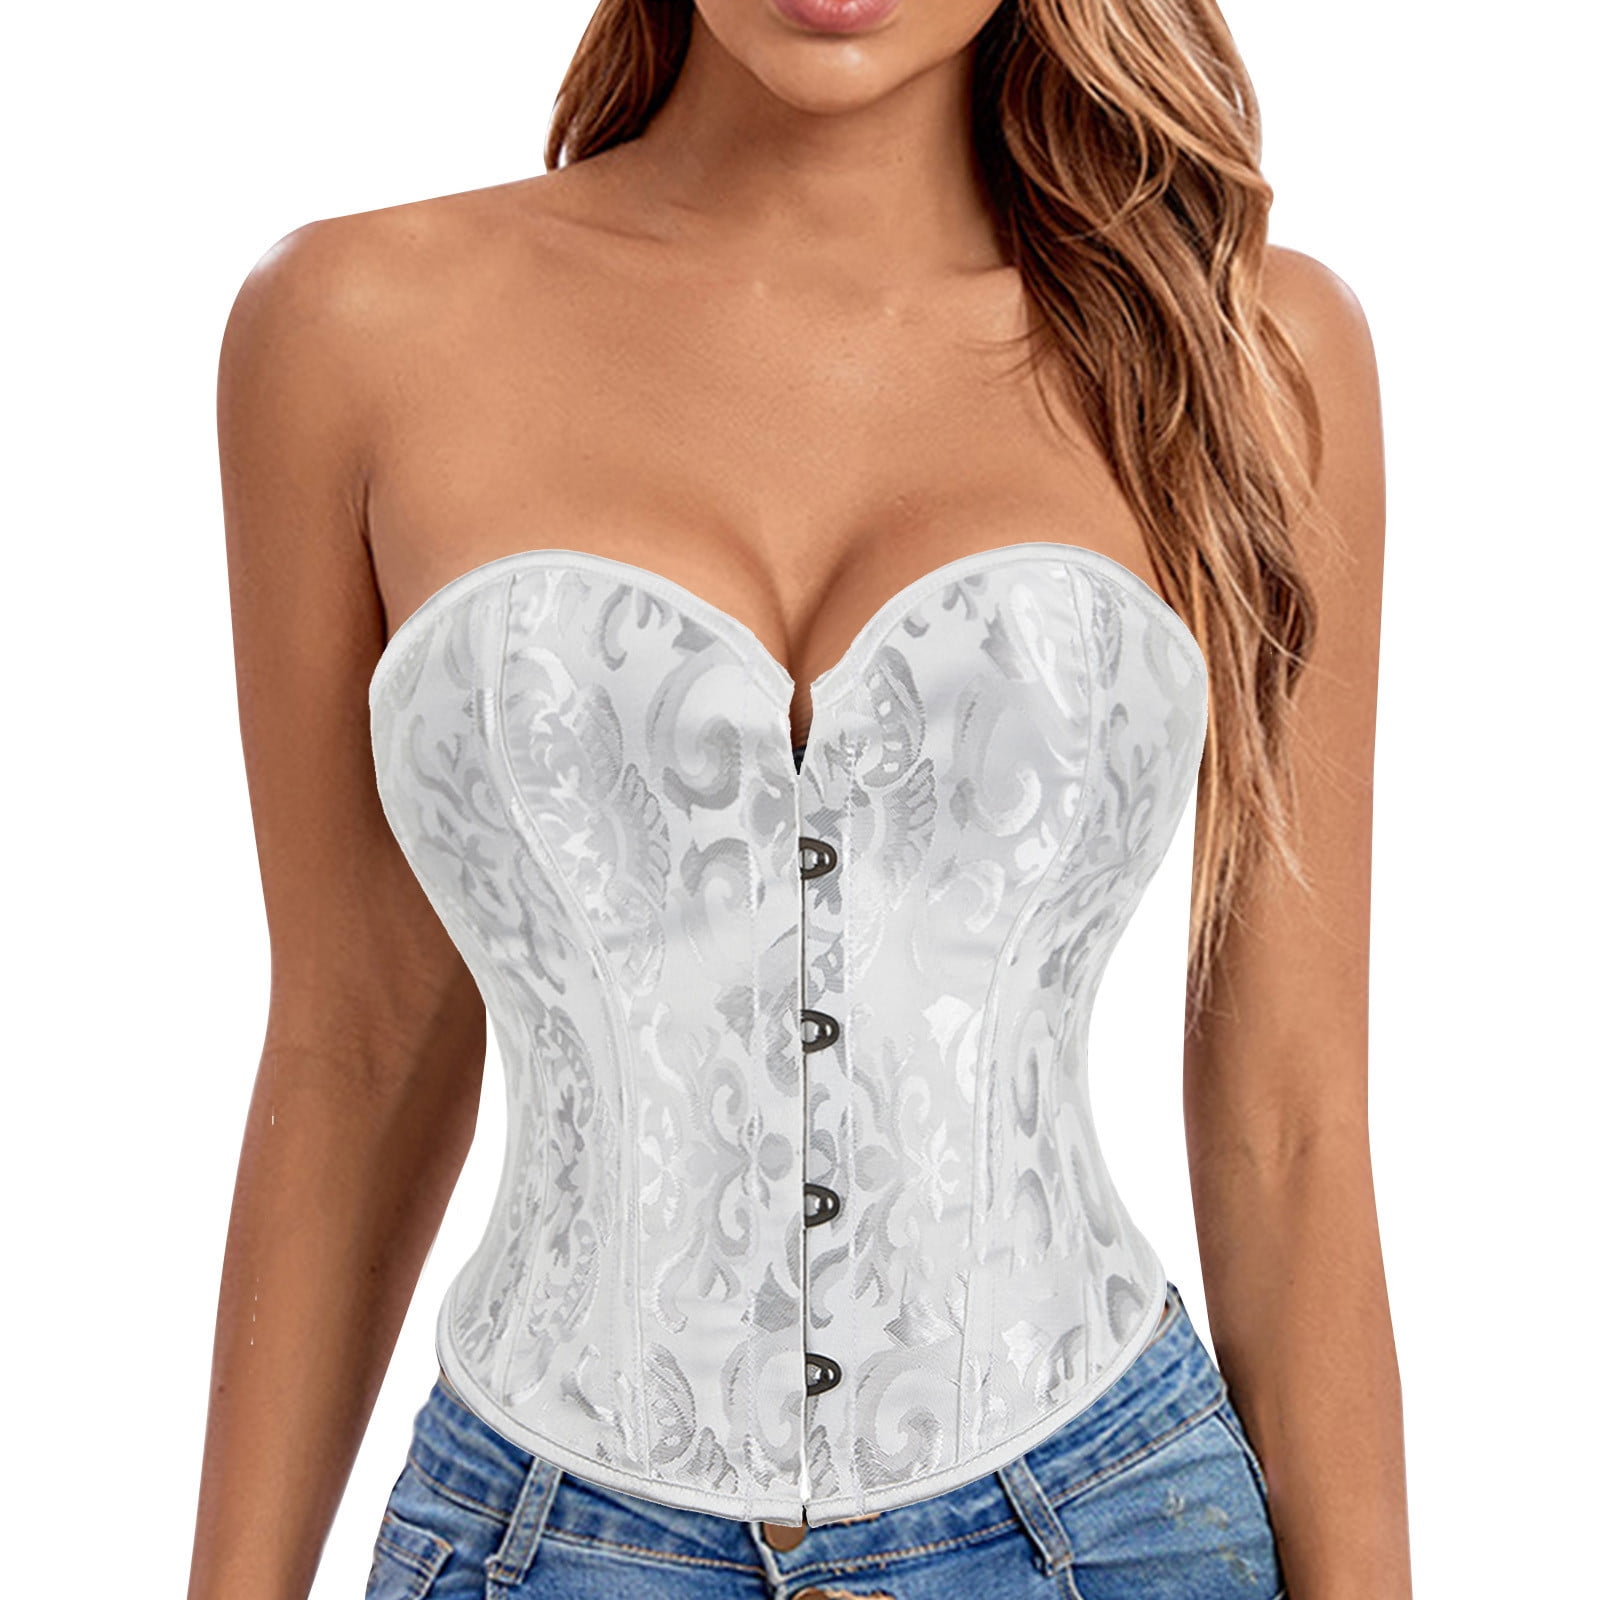 inhzoy Women See Through Lace 1/4 Cups Balconette Bustier Push Up